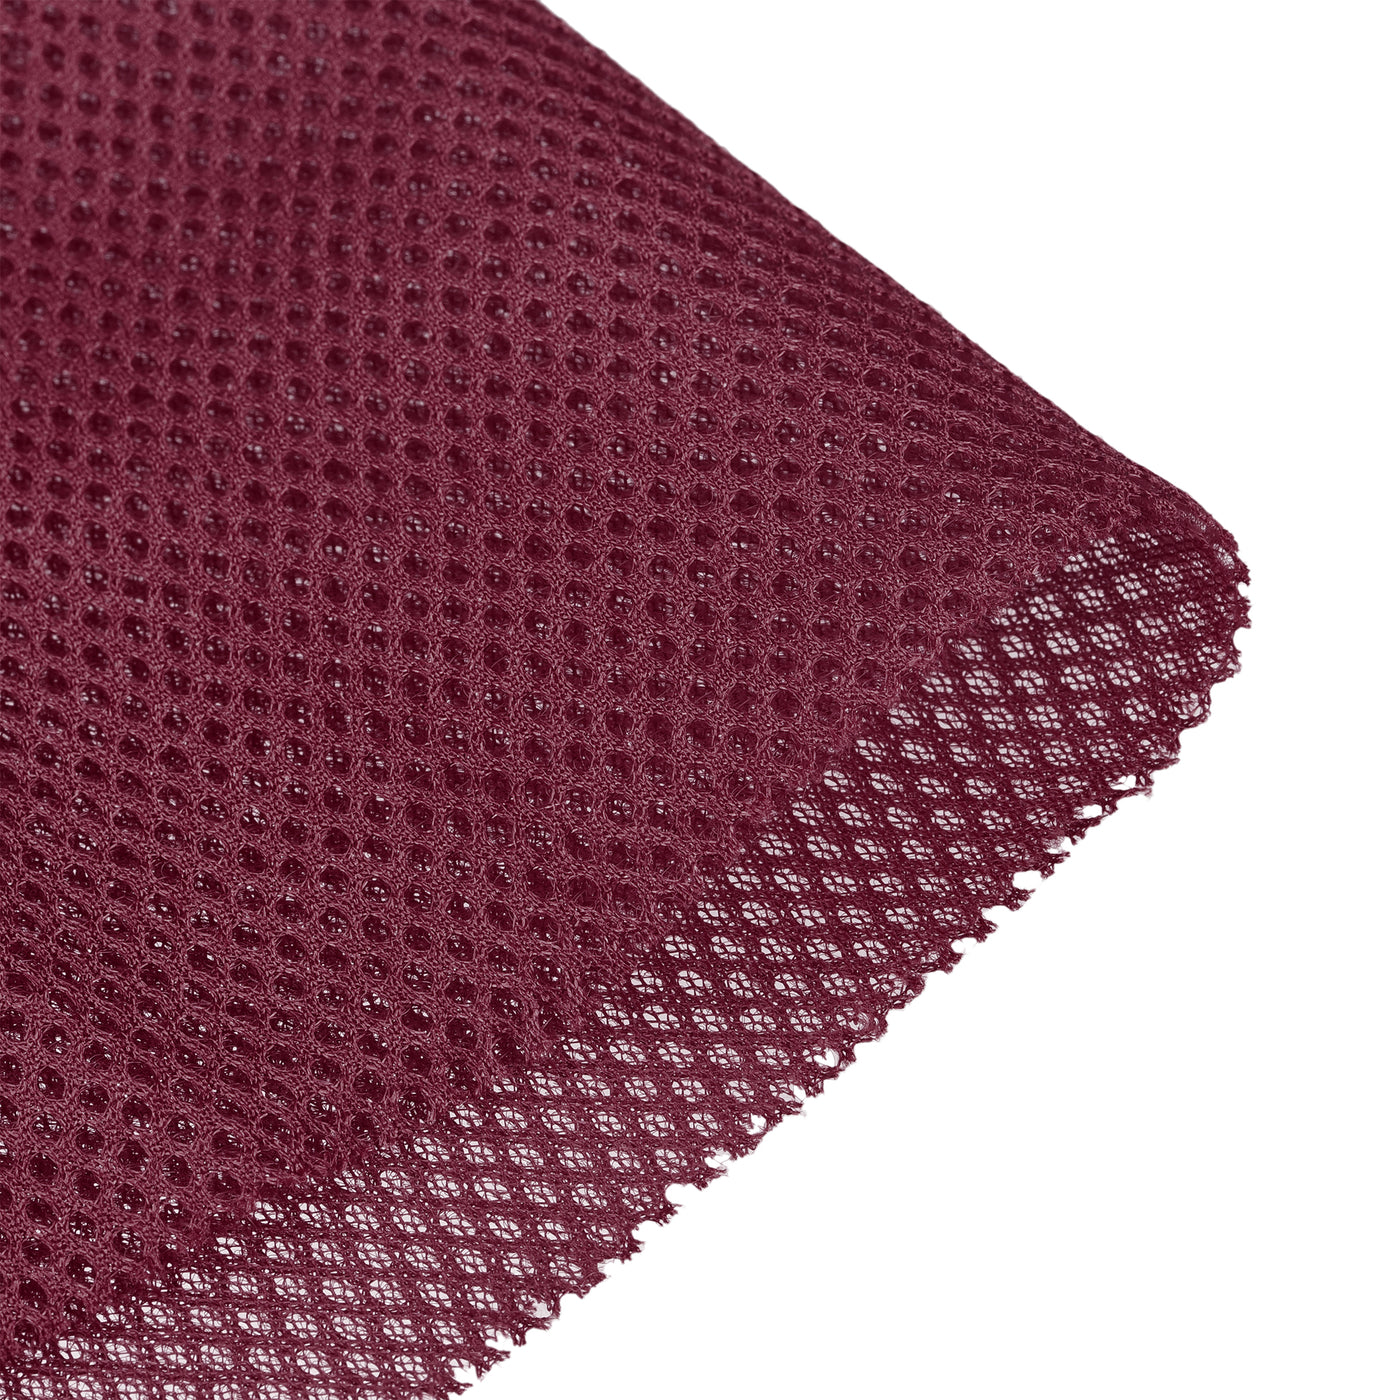 uxcell Uxcell 2Pcs Wine Red Speaker Mesh Grill Stereo Fabric Dustproof 50cm x 160cm 20" x 63"